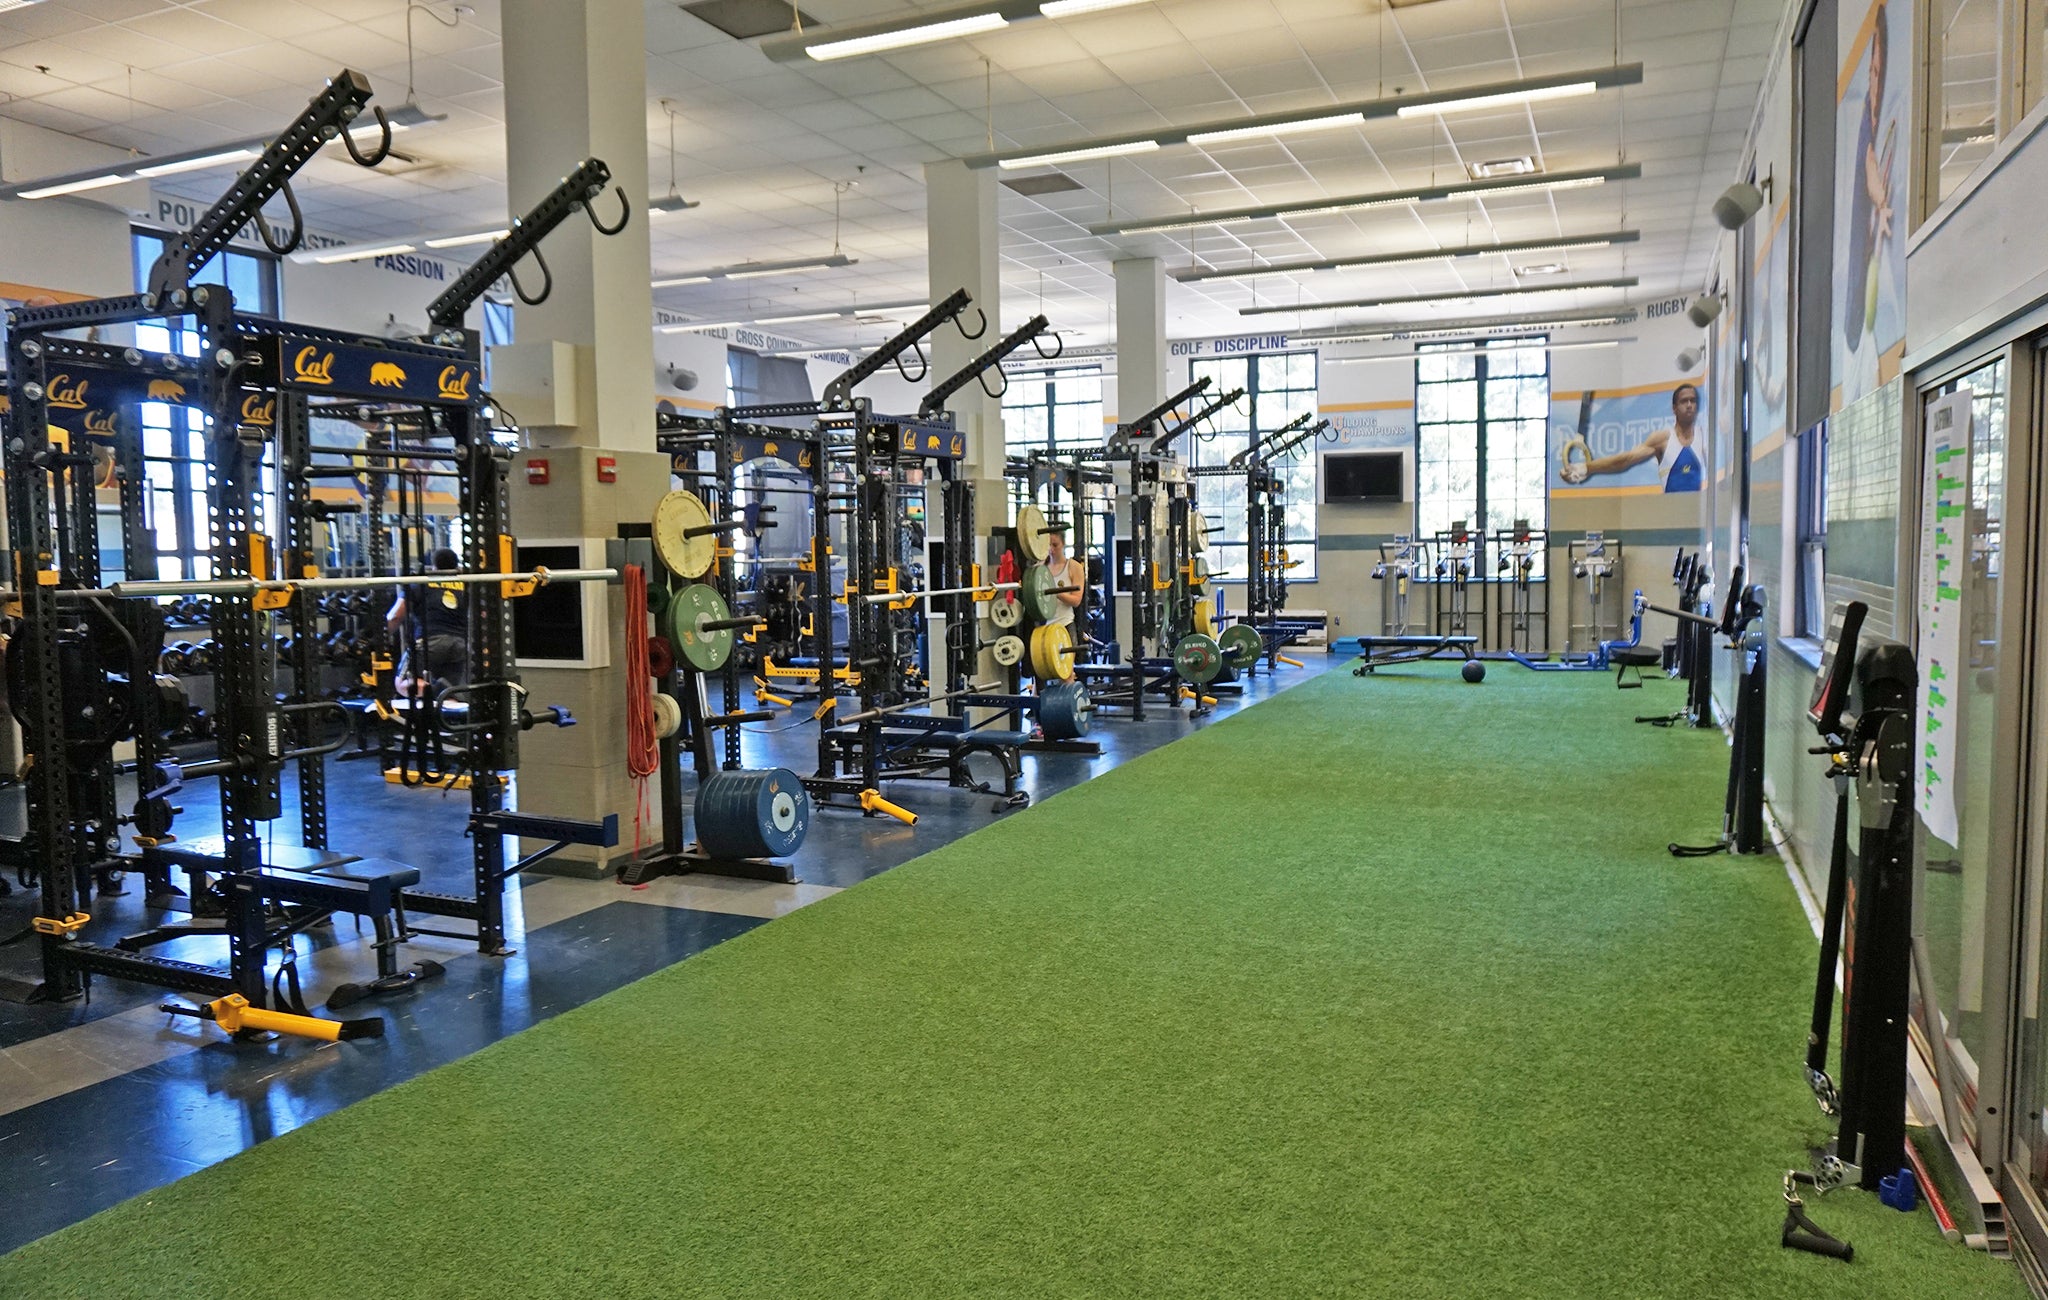 University of California Olympic Weight Room